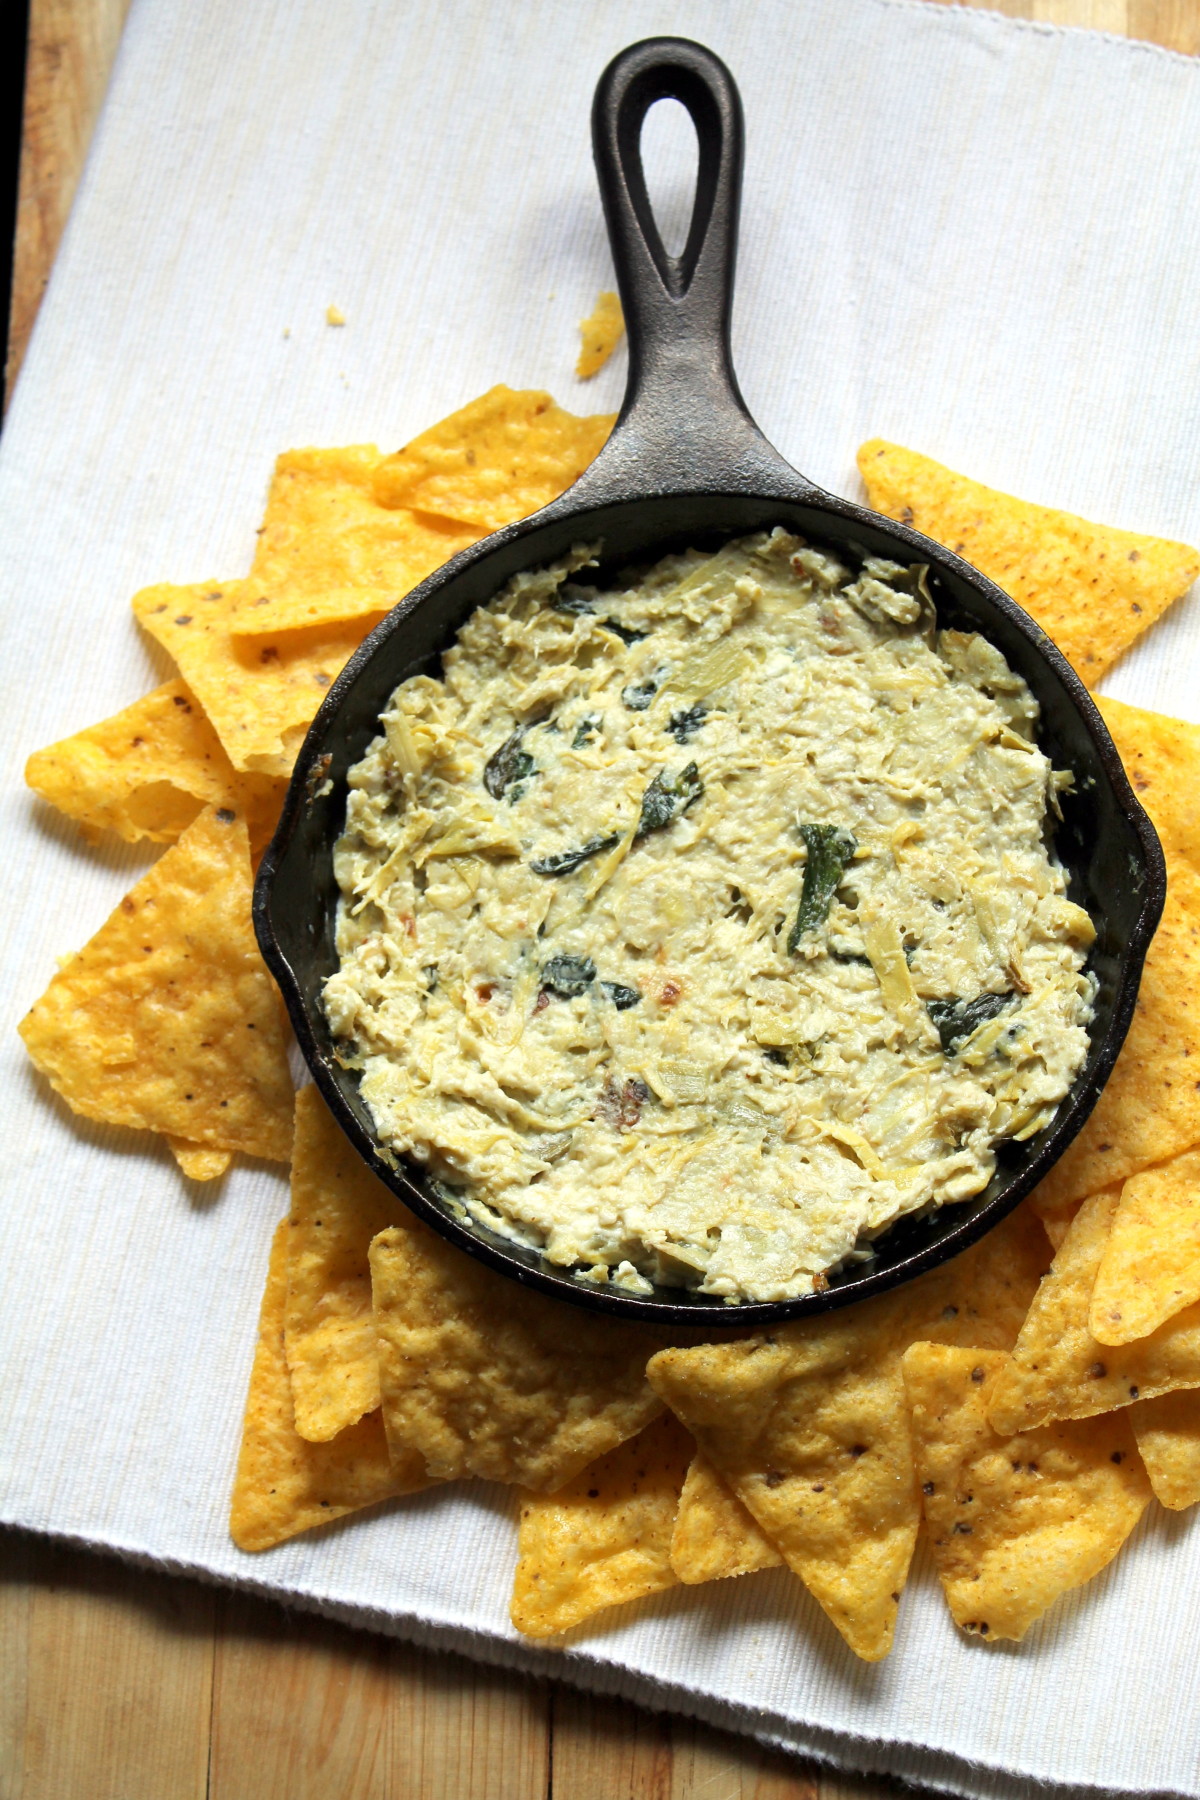 Simple feta and artichoke dip. 6 ingredients and nothing to chop! Much lighter than the usual artichoke dip, but I think it's actually tastier!